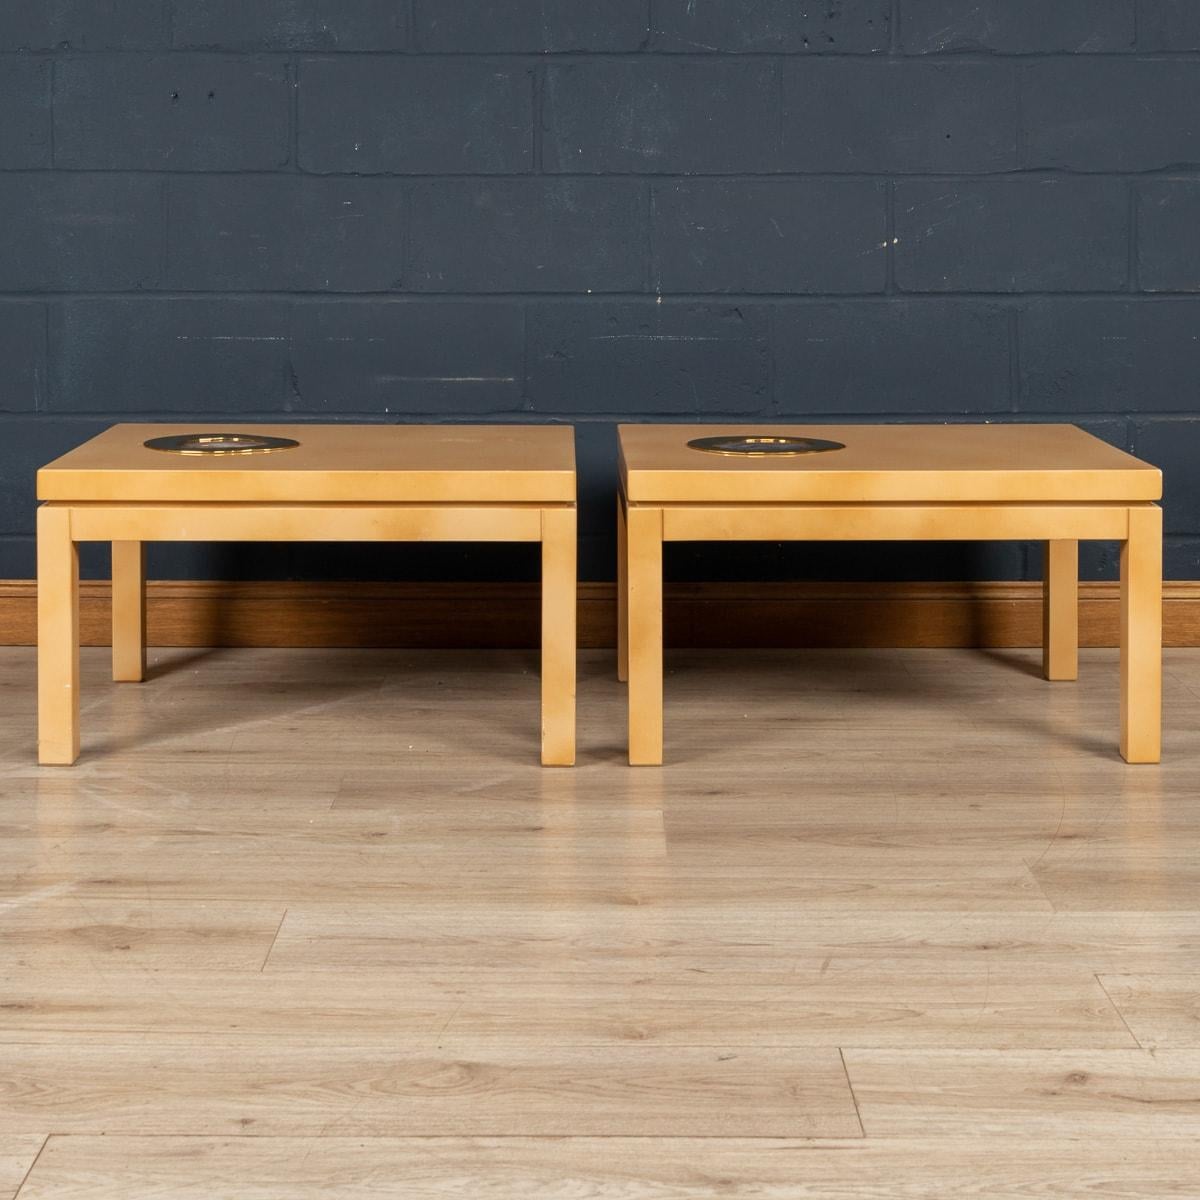 A Pair Of Belgian Lacquered Wood & Agate Side Tables By Willy Daro, c.1970 For Sale 2